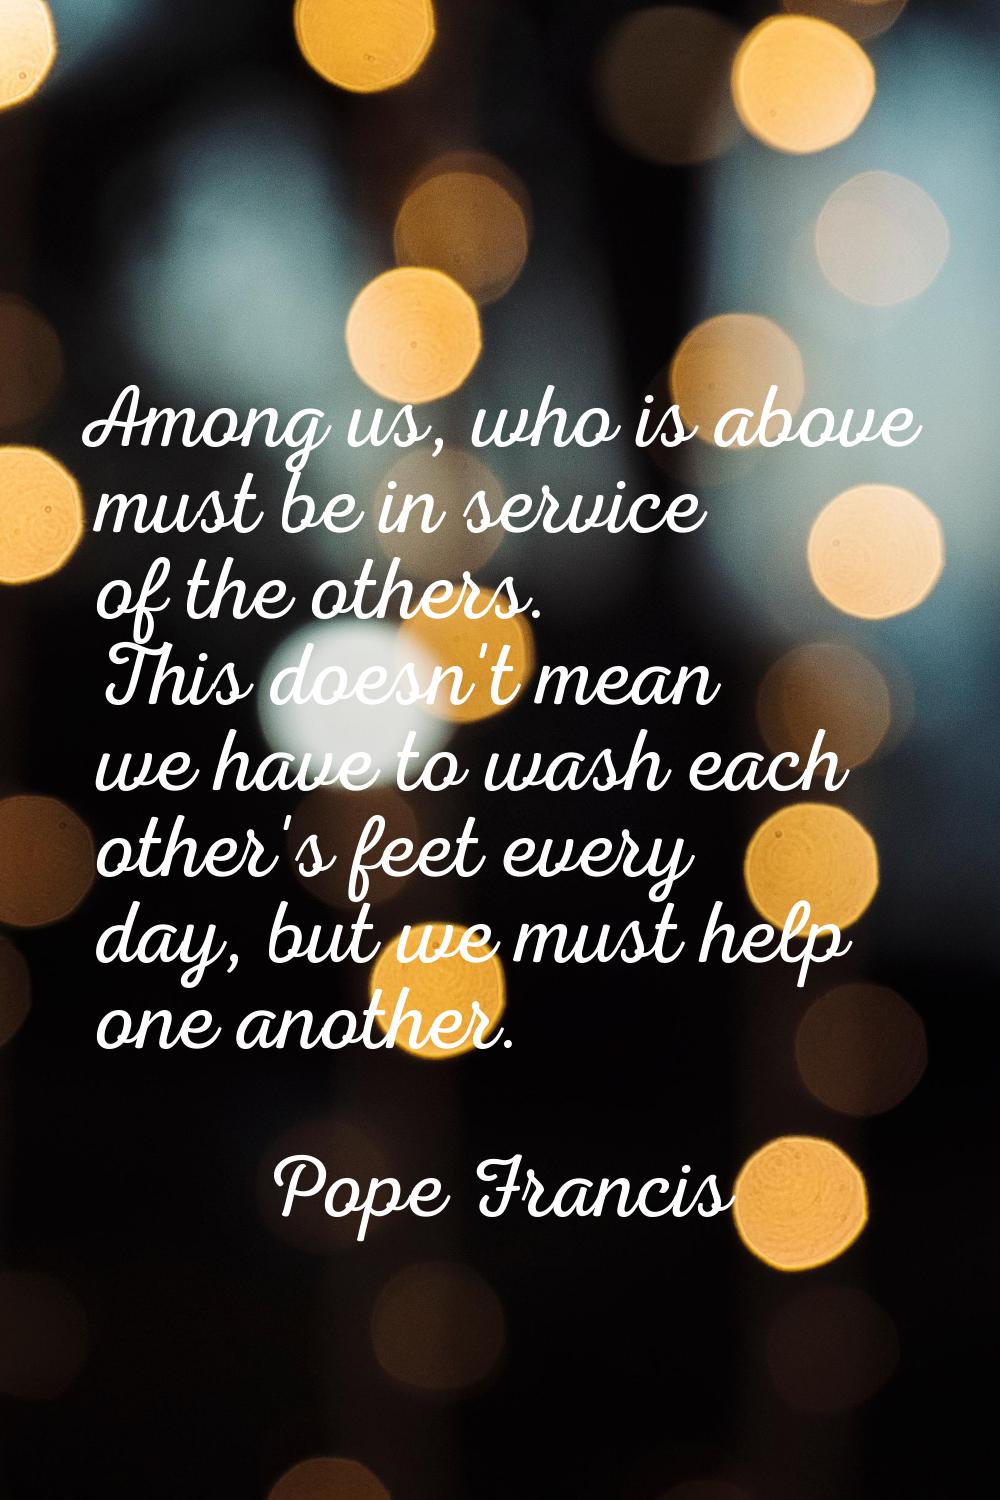 Among us, who is above must be in service of the others. This doesn't mean we have to wash each oth